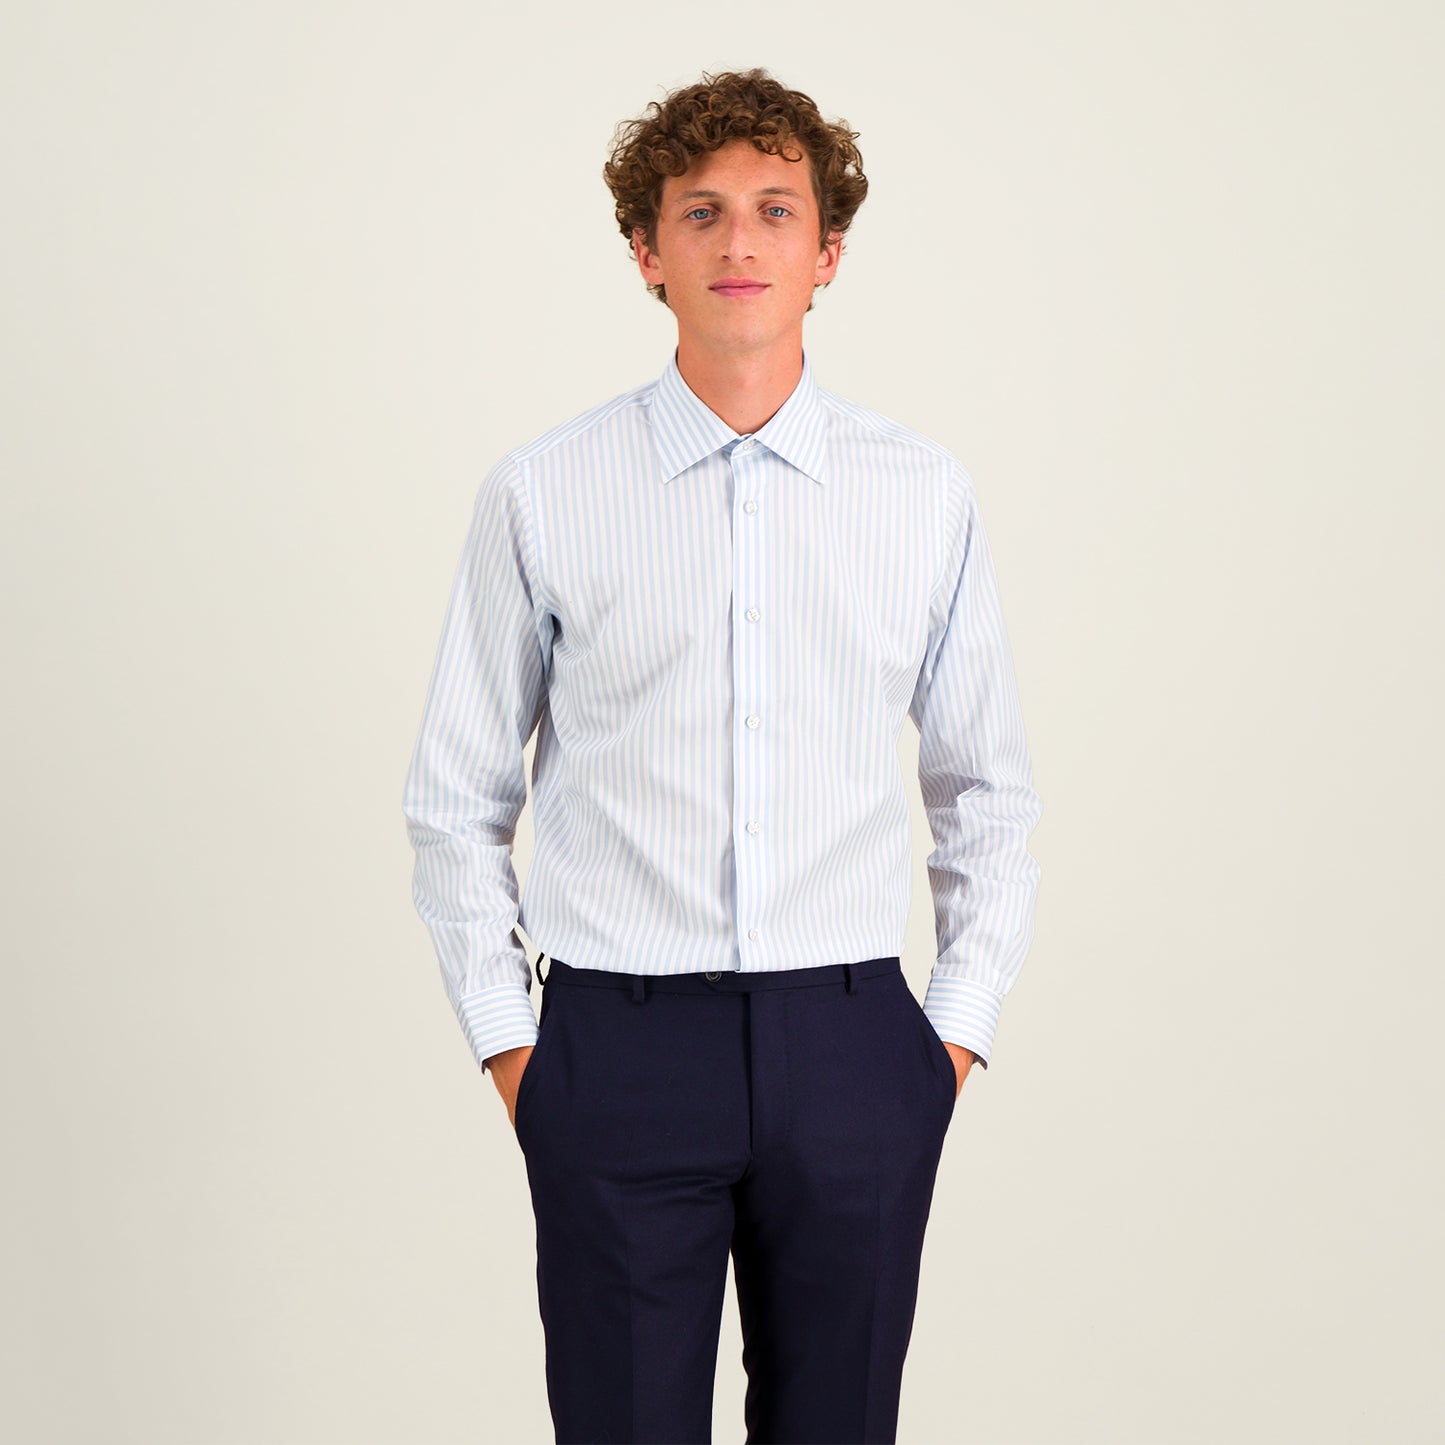 Fitted shirt in double-twisted poplin with sky blue and white stripes